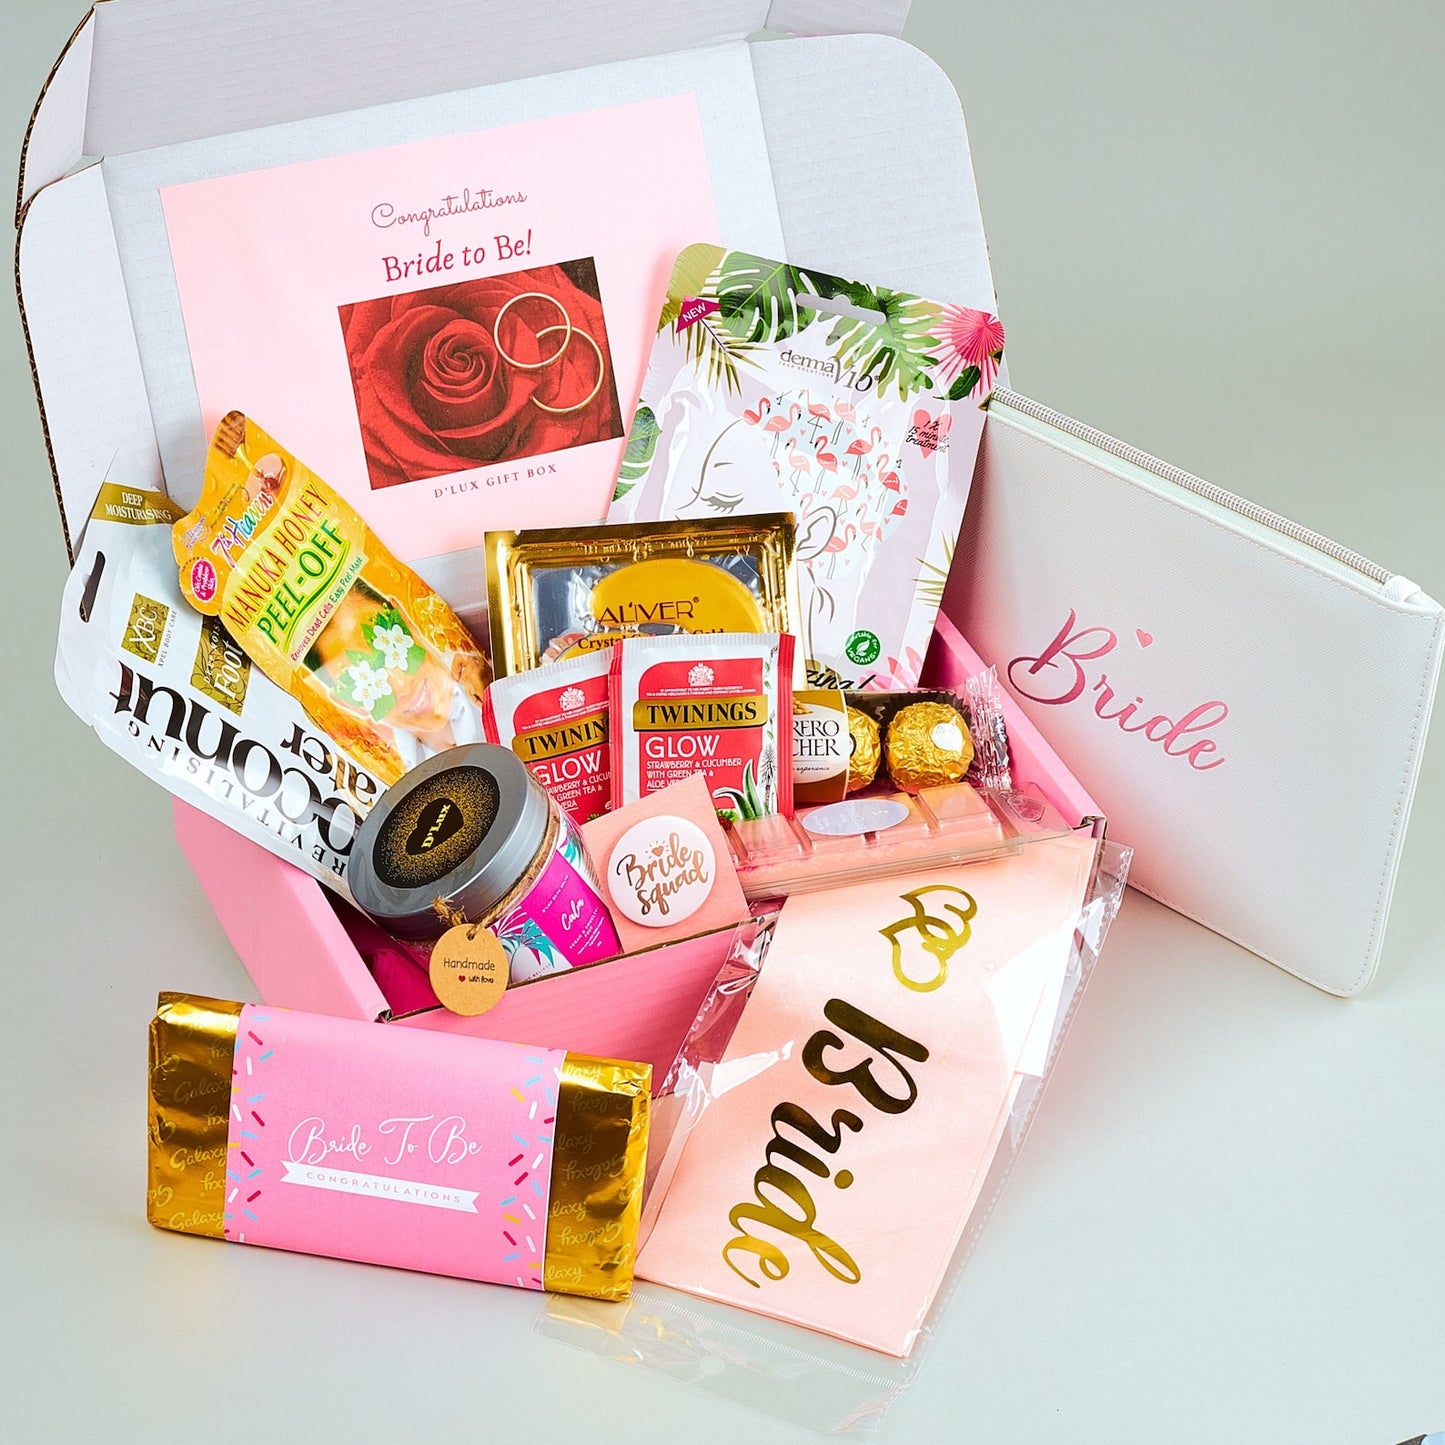 Bride-to-be Hamper : Radiance for the Special Day! 💐